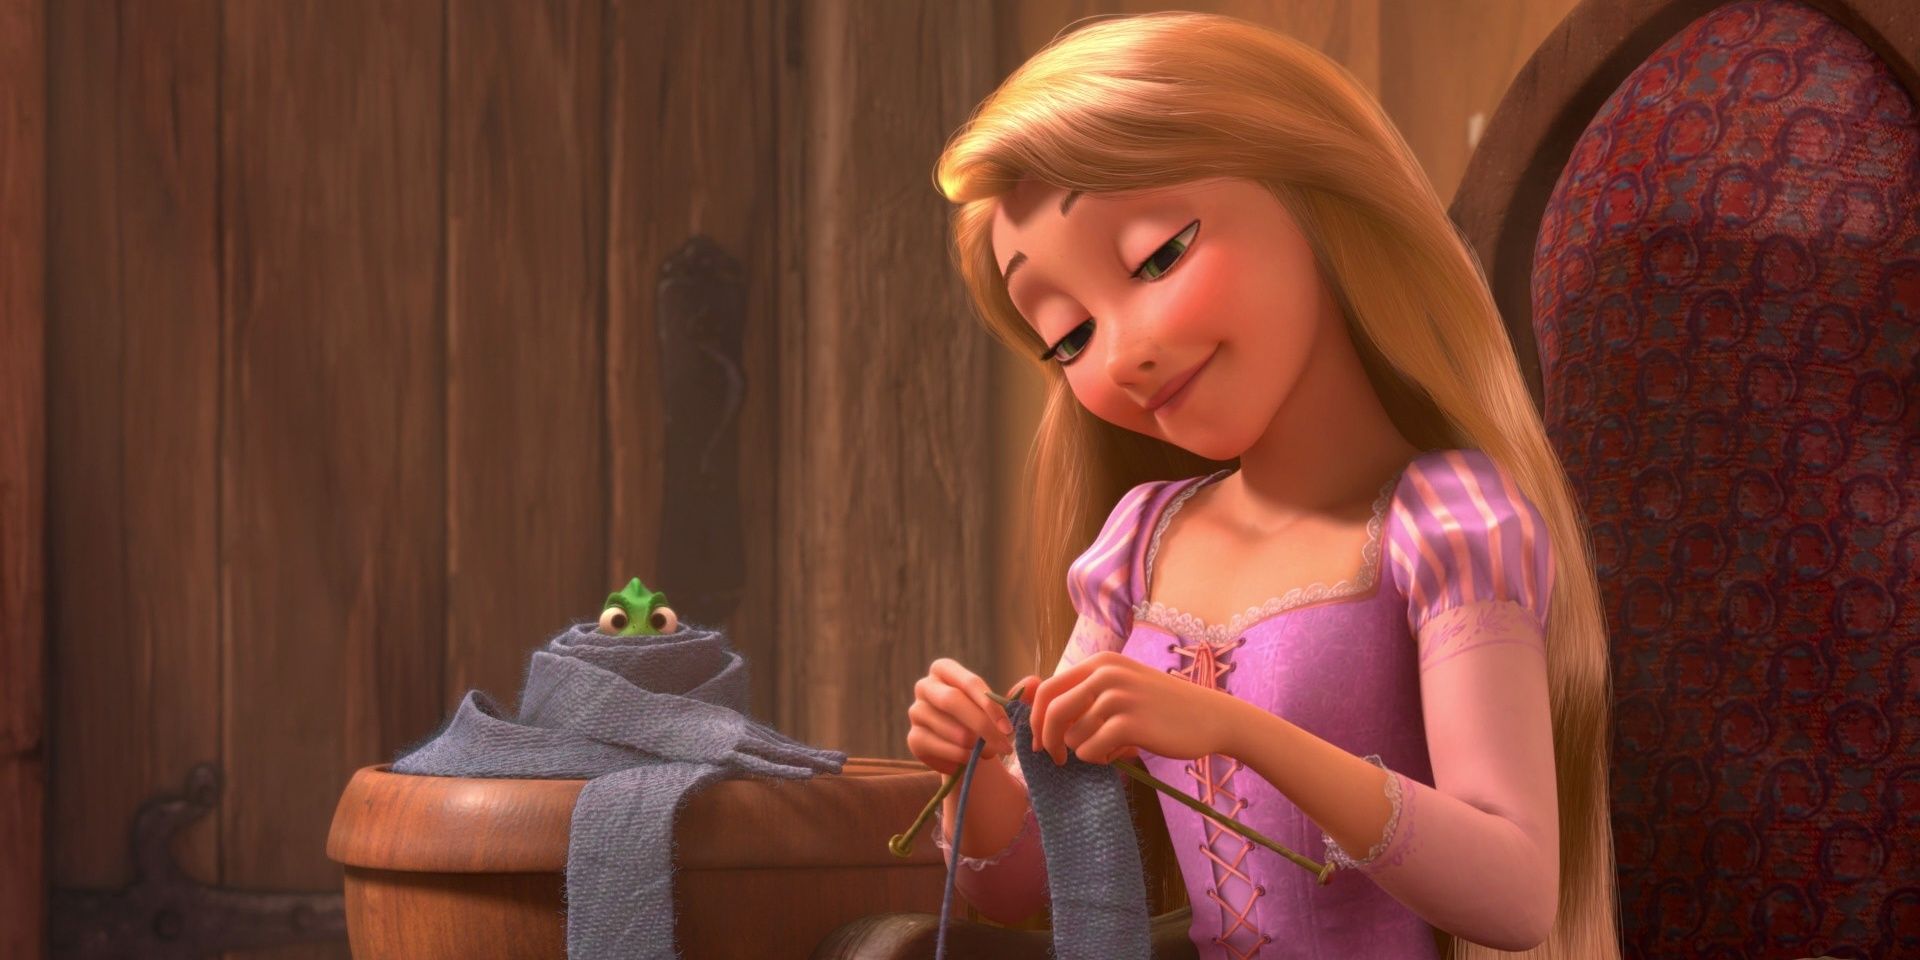 A Tangled still shows Rapunzel knitting the end of a scarf which Pascal is wearing while in the tower